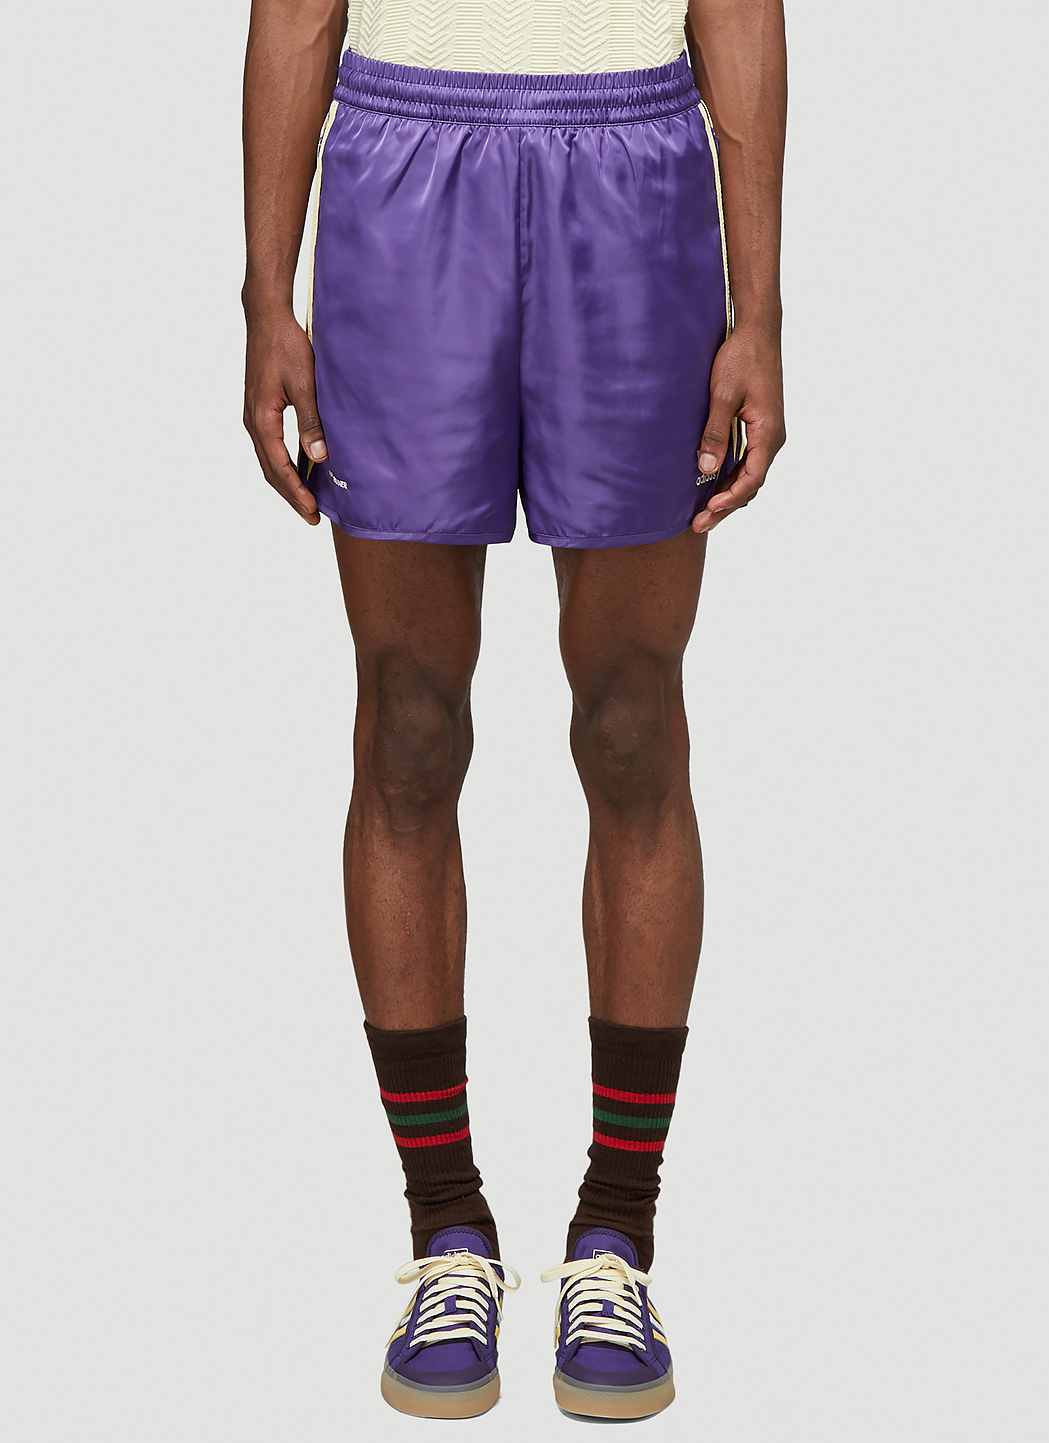 adidas by Wales Bonner Unisex 70s Track Shorts in Purple | LN-CC